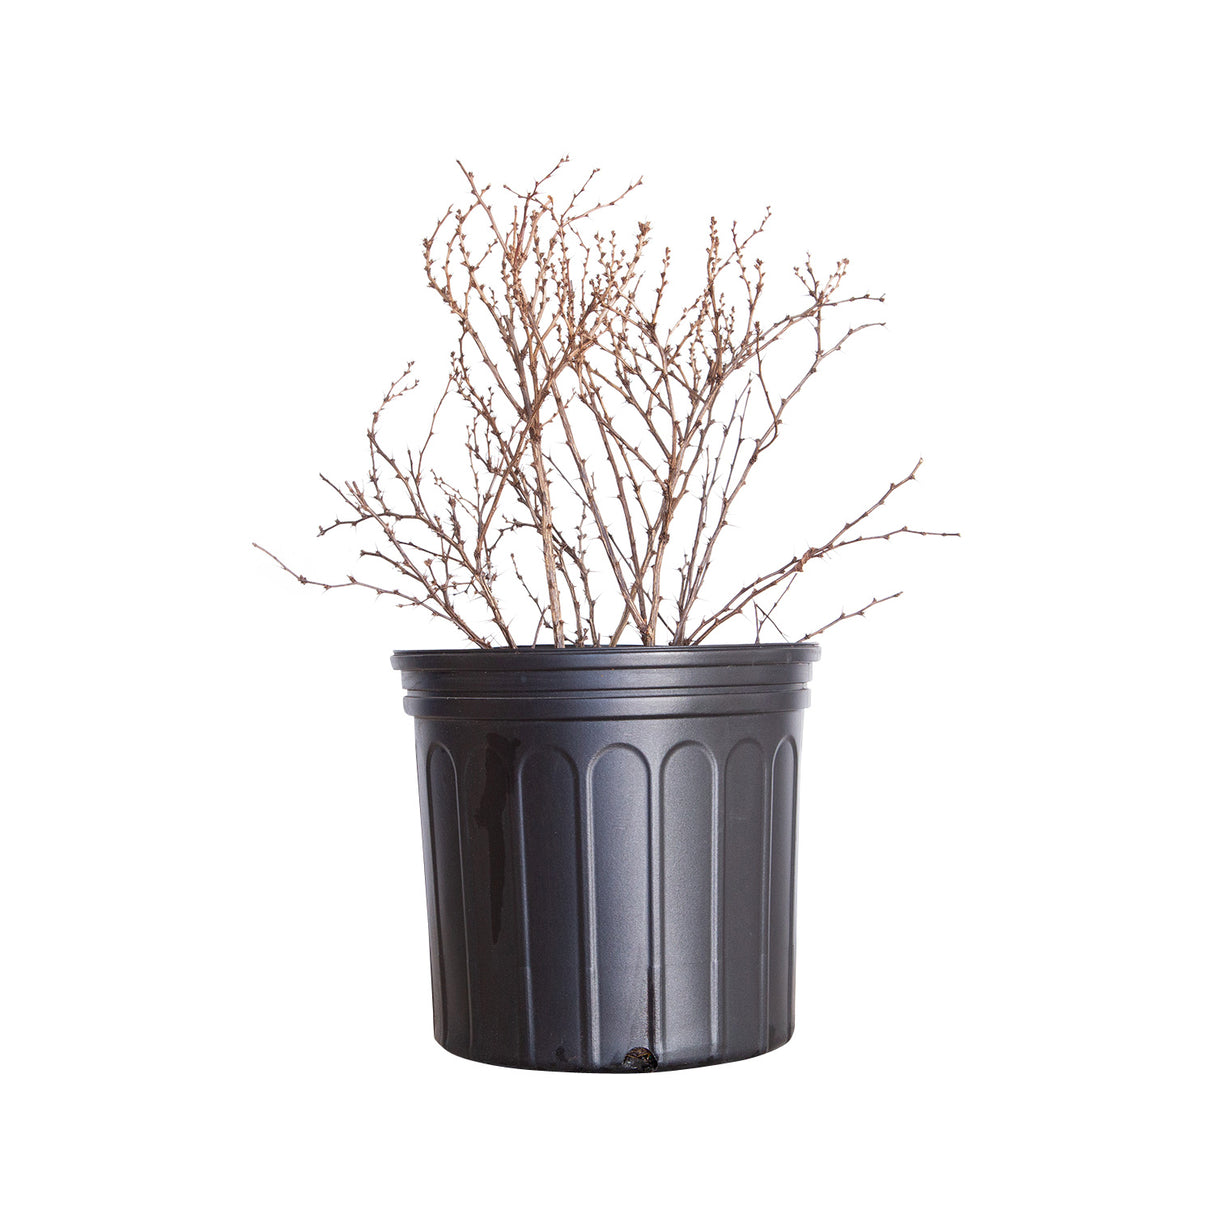 2.4 Gallon Rose Glow Barberry dormant in black container.